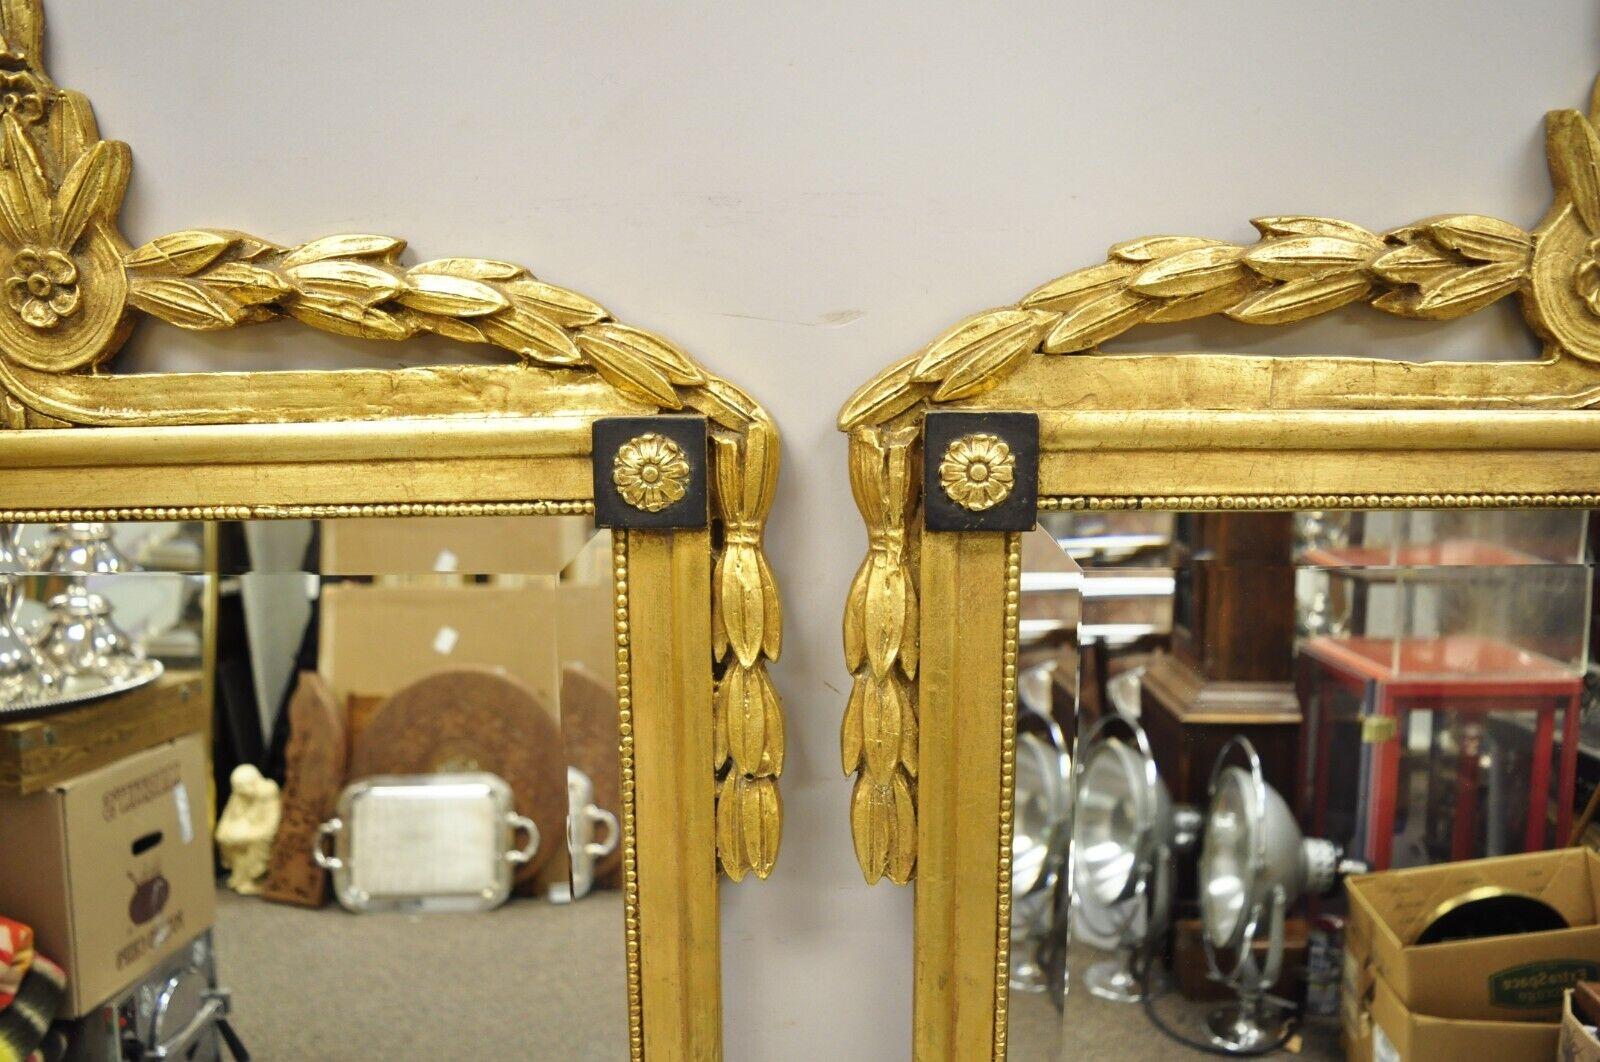 20th Century Friedman Brothers French Neoclassical Carved Wood Large Wall Mirrors - a Pair For Sale